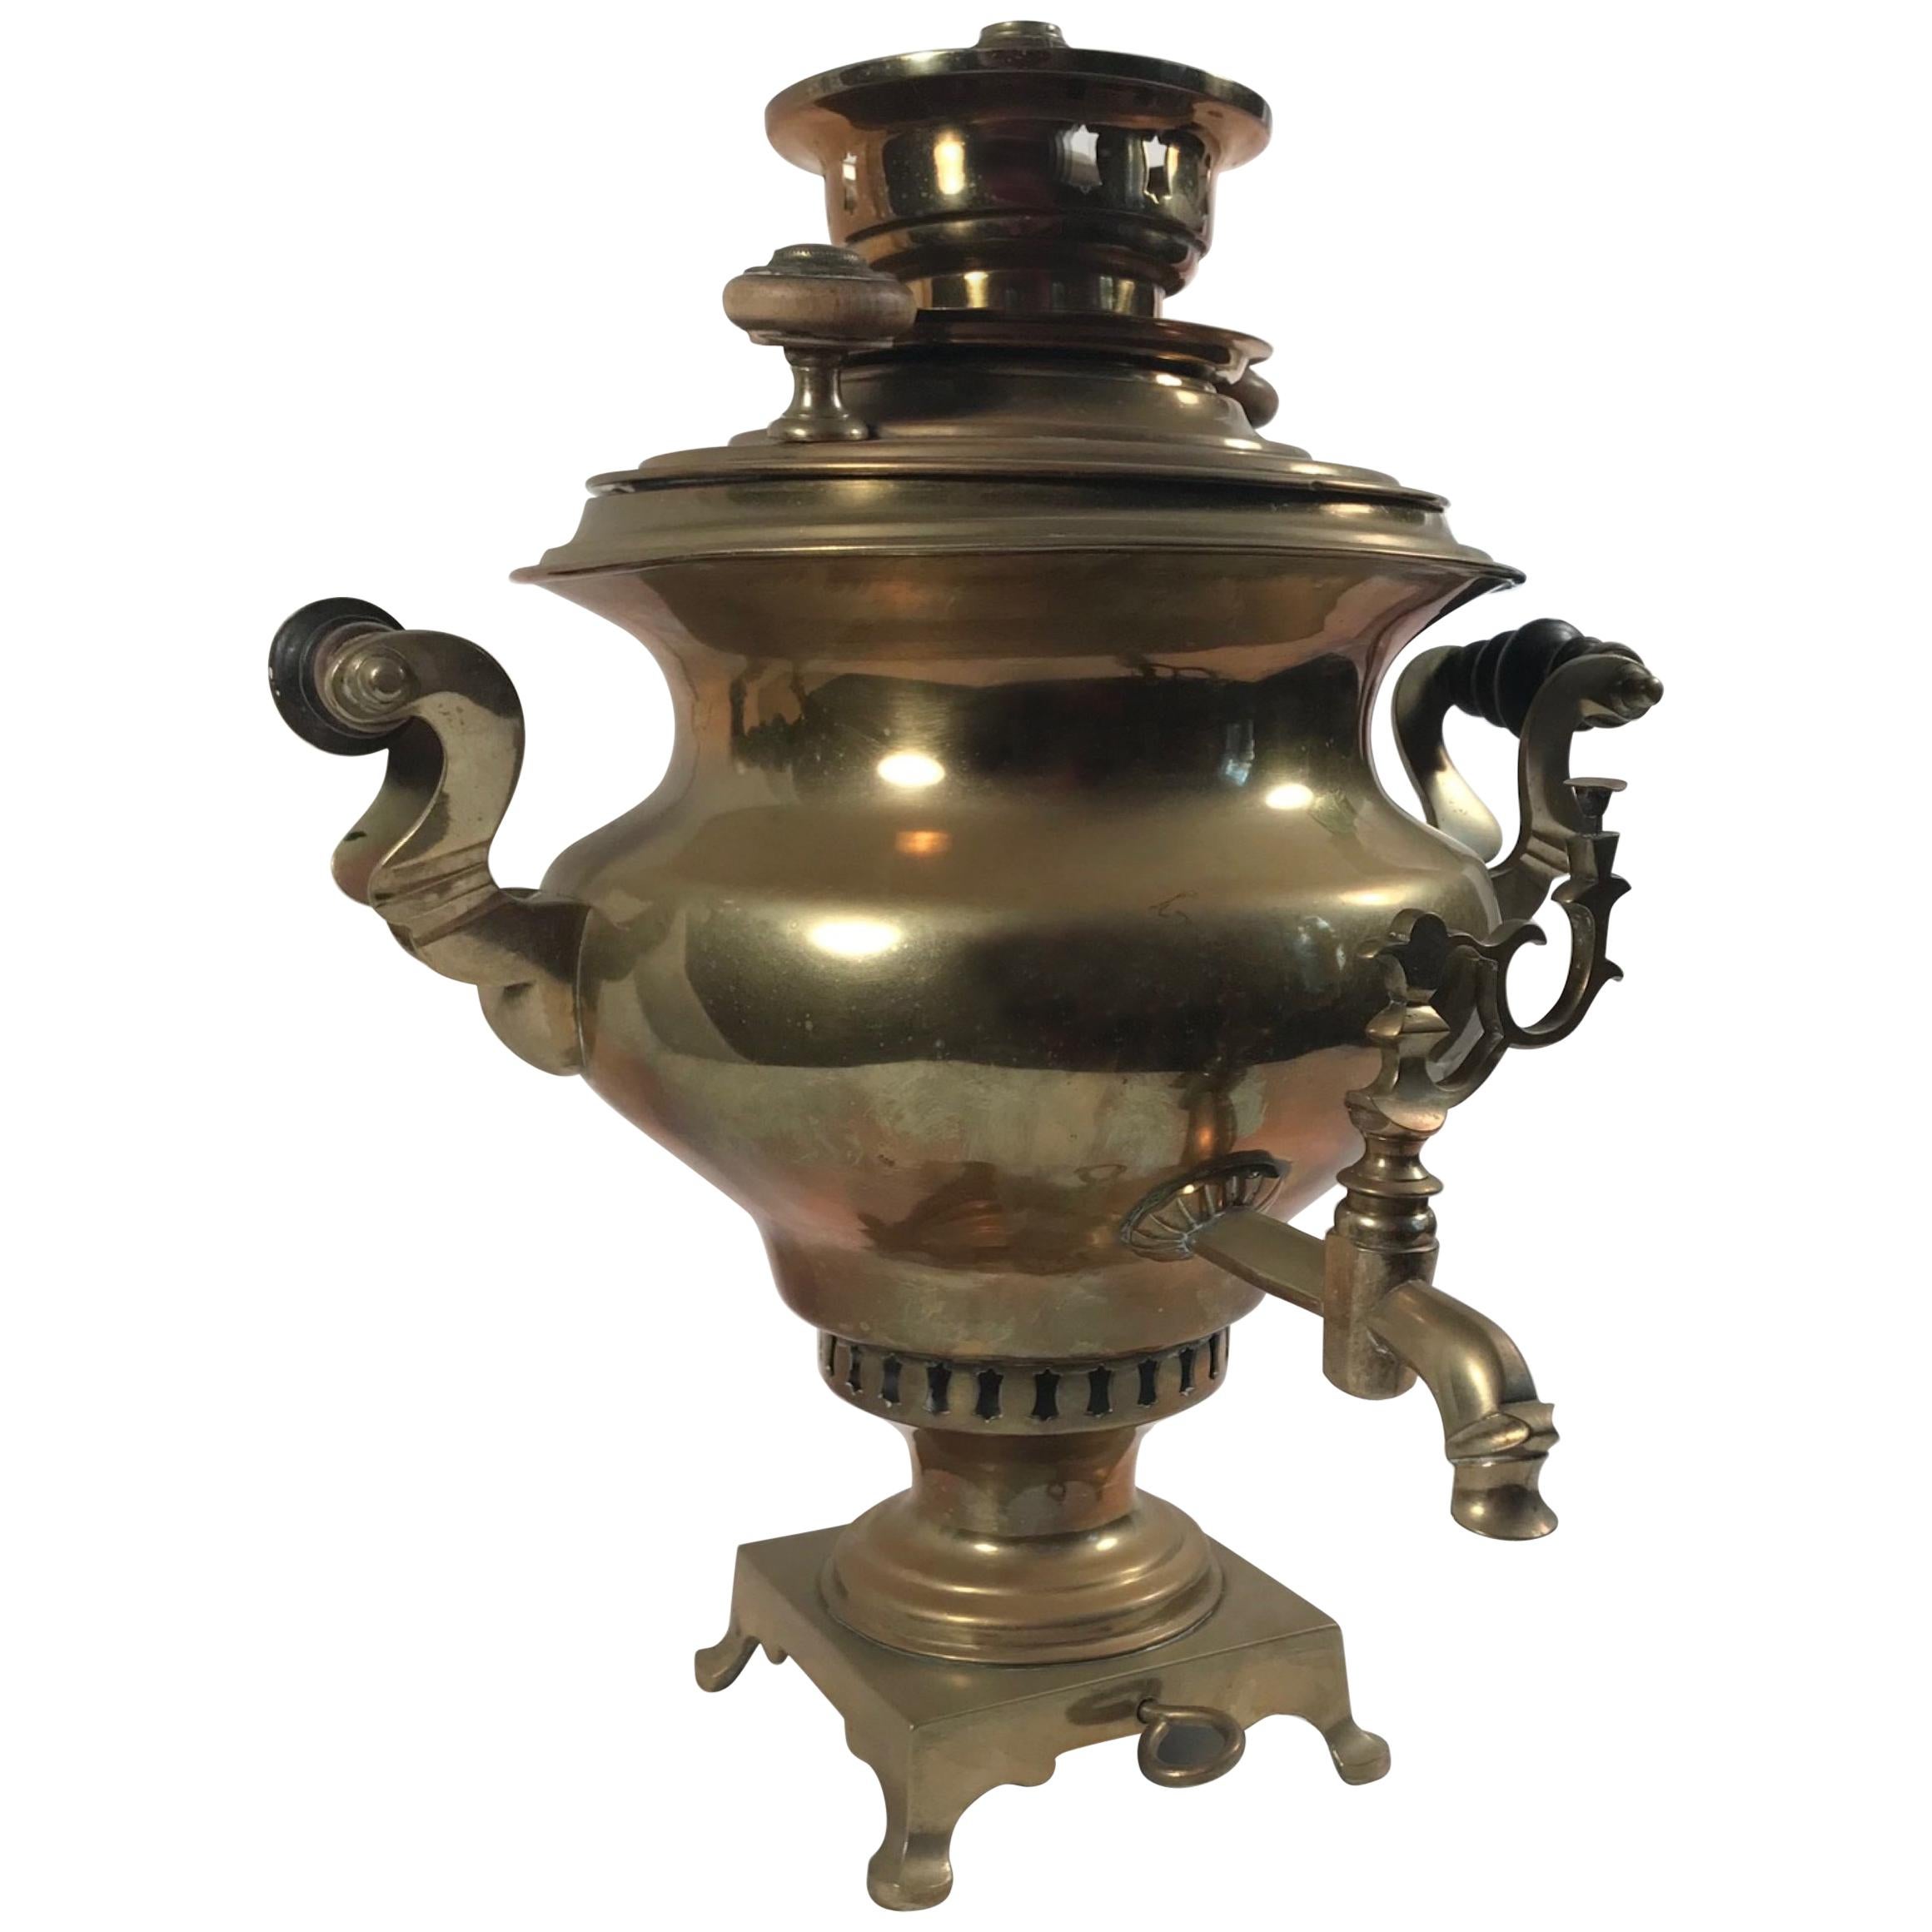 Decorative Imperial Russian Samovar, Late 19th Century